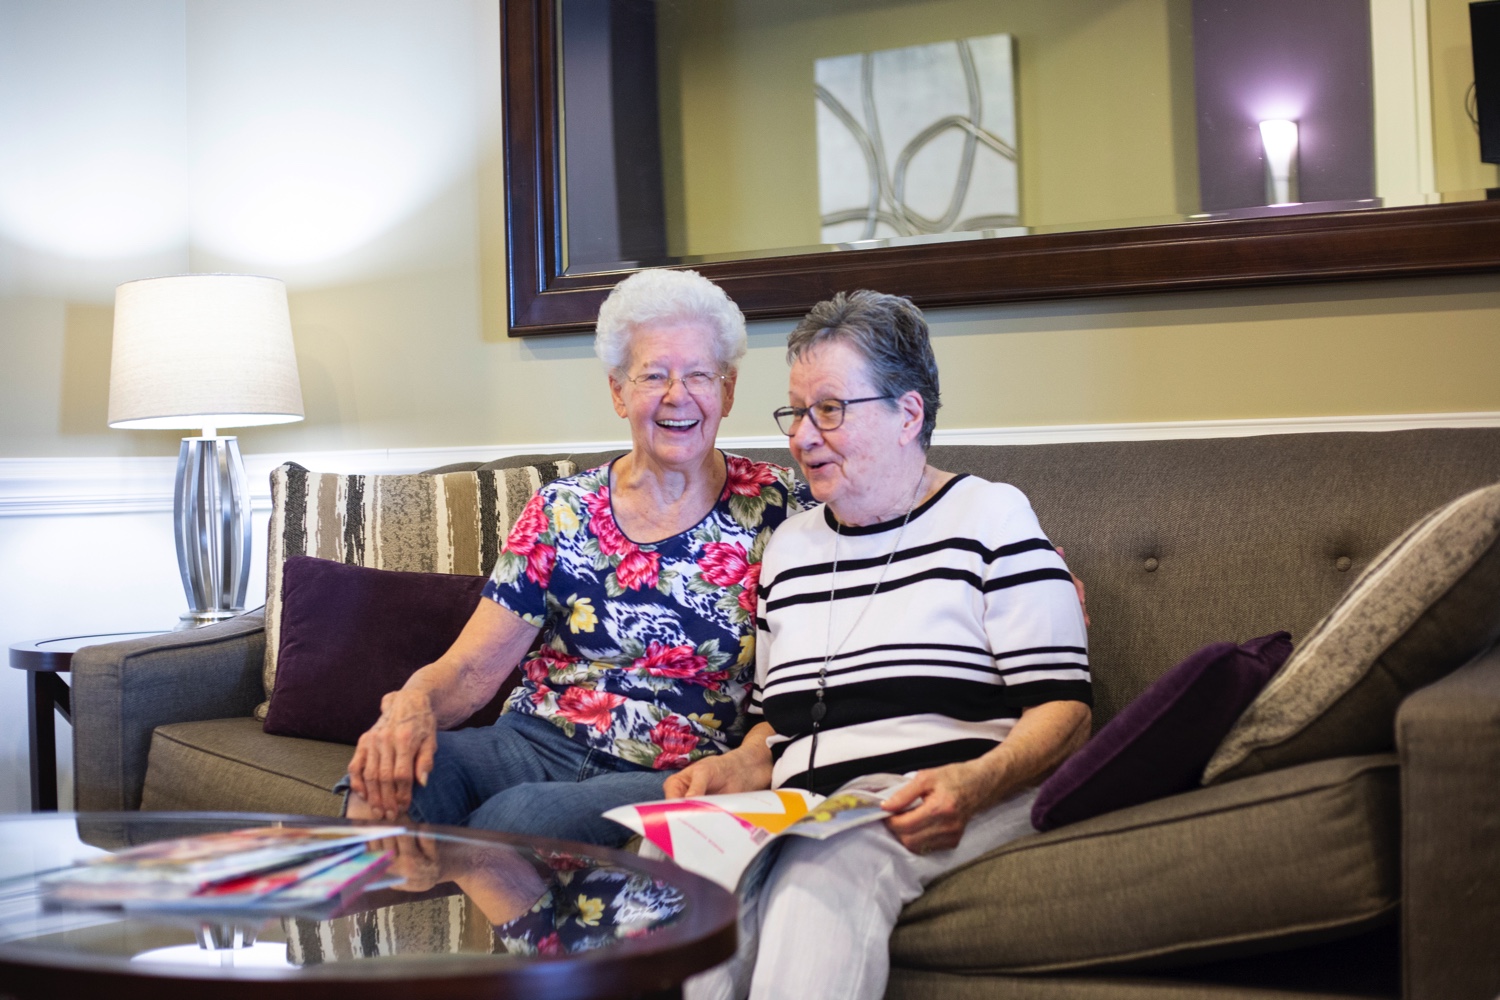 Two senior women Sitting on Couch Reading Magazine Together